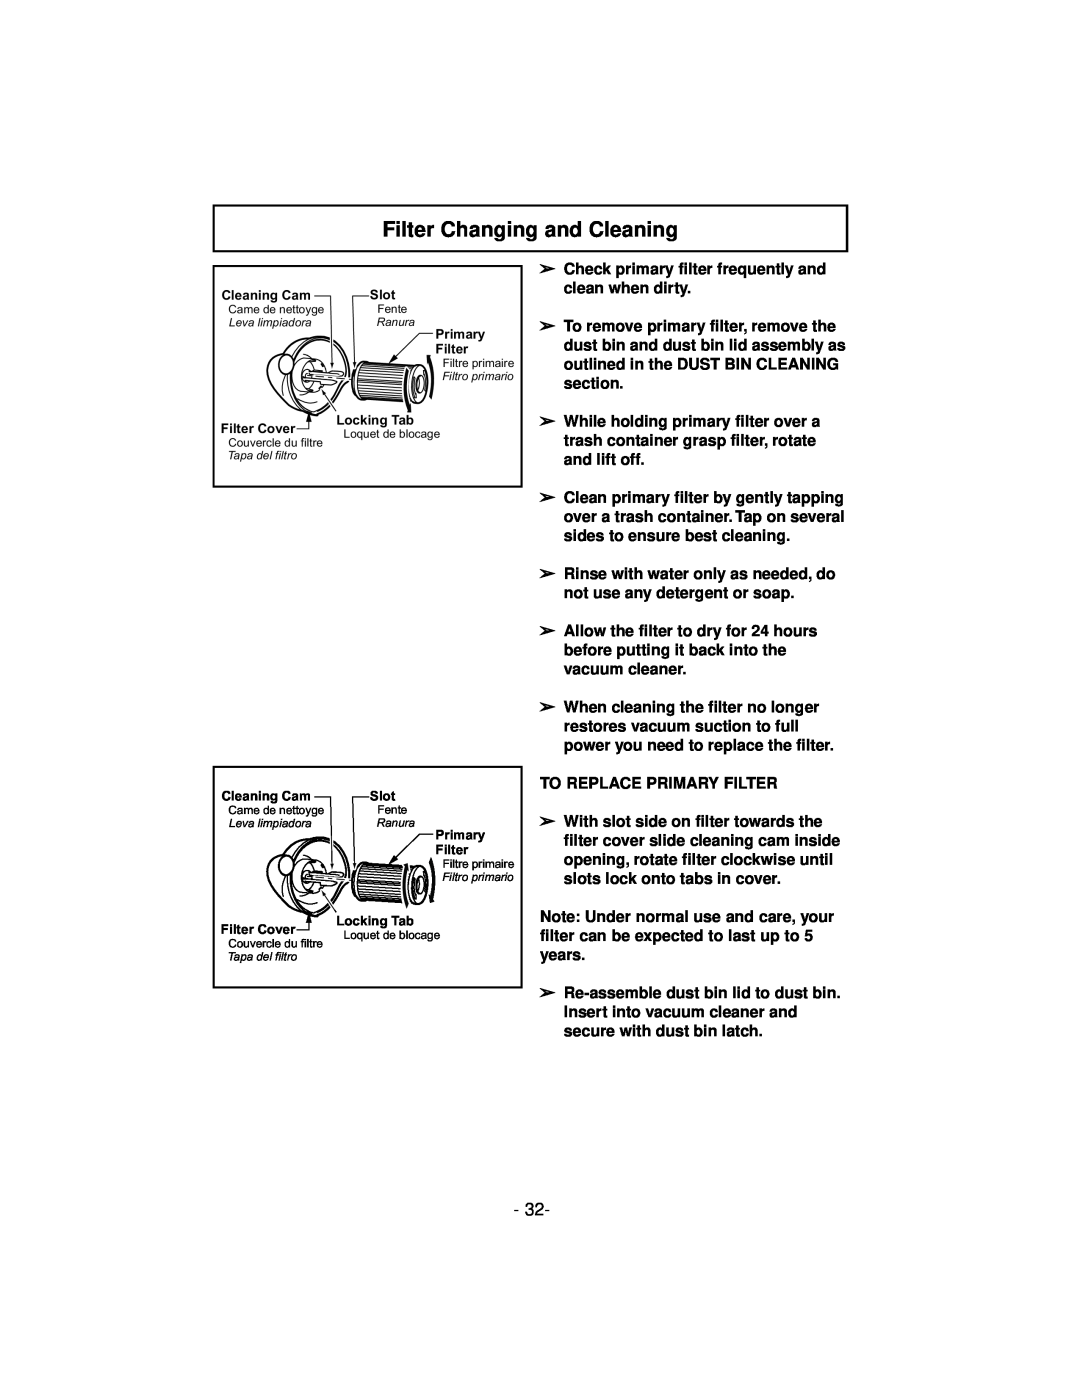 Panasonic MC-V7600 operating instructions Filter Changing and Cleaning 